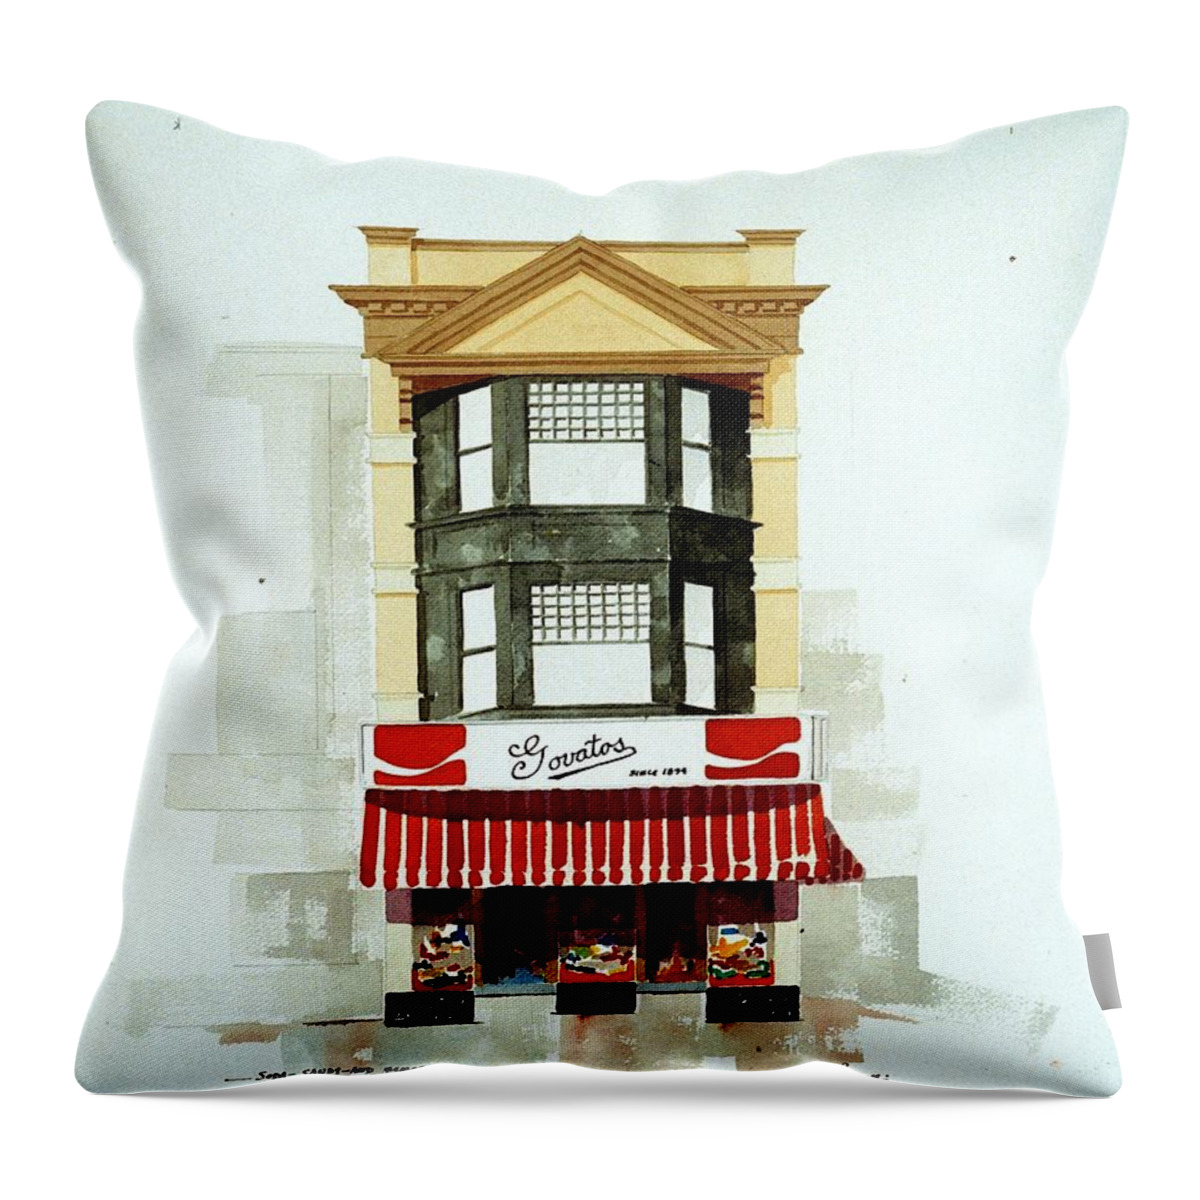 Wilmington De Throw Pillow featuring the painting Govatos' Candy Store by William Renzulli